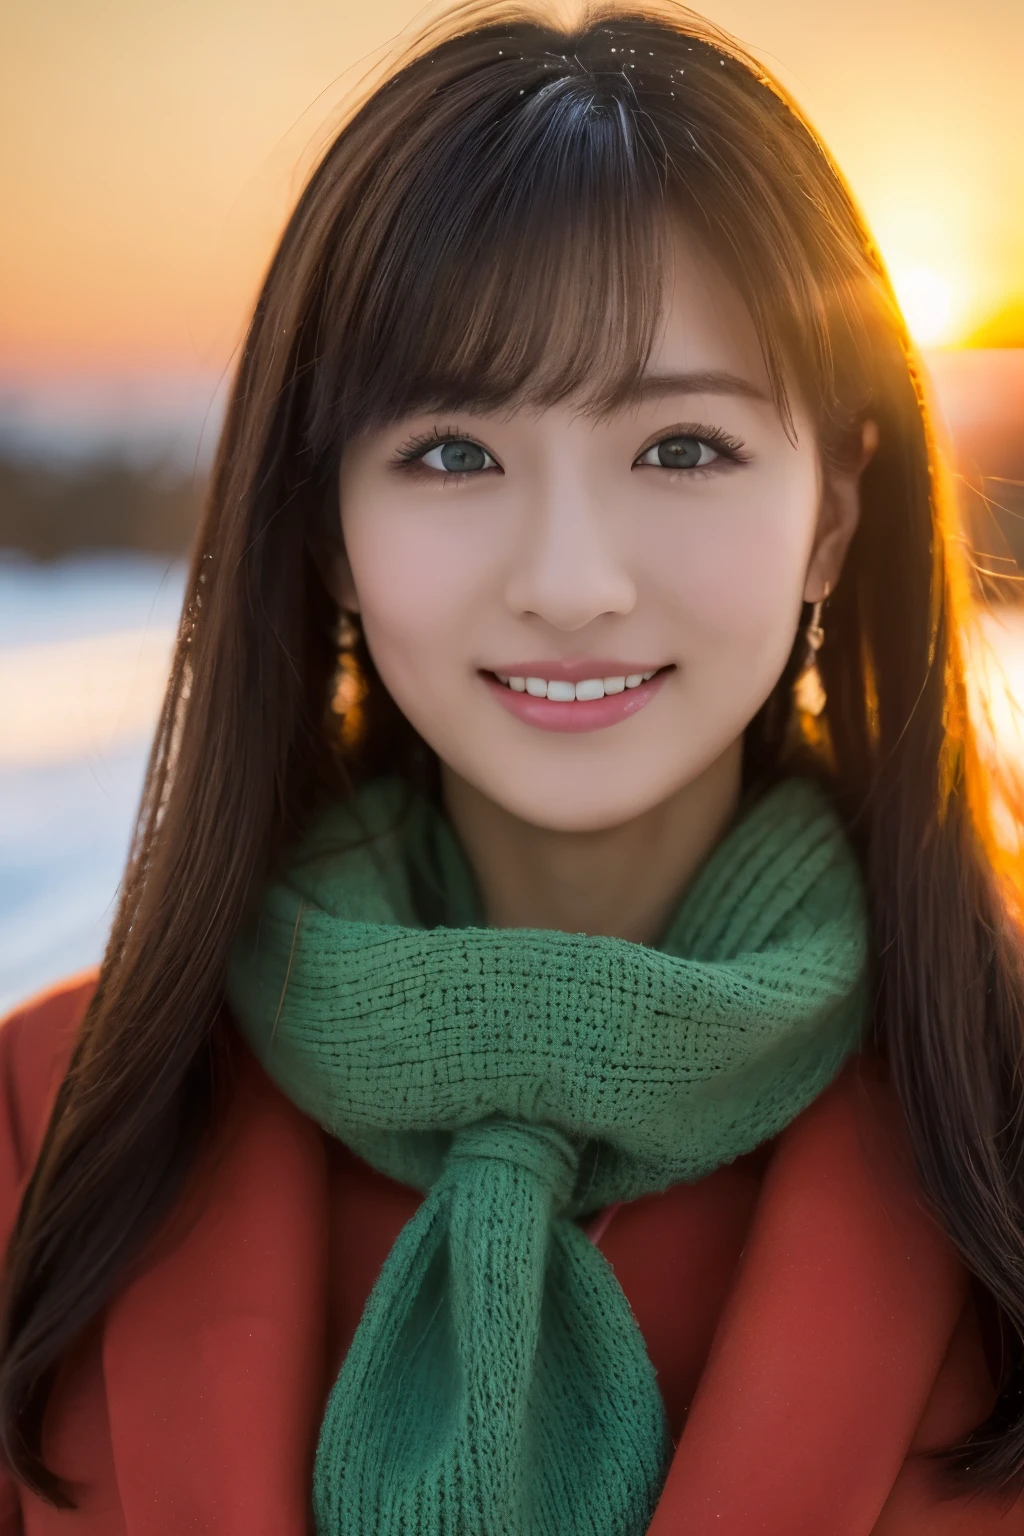 1girl in, (Green muffler:1.4), Very beautiful Japan actress,
(Raw photo, Best Quality), (Realistic, Photorealsitic:1.4), masutepiece, 
Extremely delicate and beautiful, Extremely detailed, 2k wallpaper, amazing, 
finely detail, the Extremely Detailed CG Unity 8K Wallpapers, Ultra-detailed, hight resolution, Soft light, 
Beautiful detailed girl, extremely detailed eye and face, beautiful detailed nose, Beautiful detailed eyes, Cinematic lighting, 
Suitable for winter, Lapland snow field, (Sun setting on the horizon:1.4), 
The bright red sunset colors the snowy field., diamond dust shine,
Perfect Anatomy, Slender body, Small, Smiling